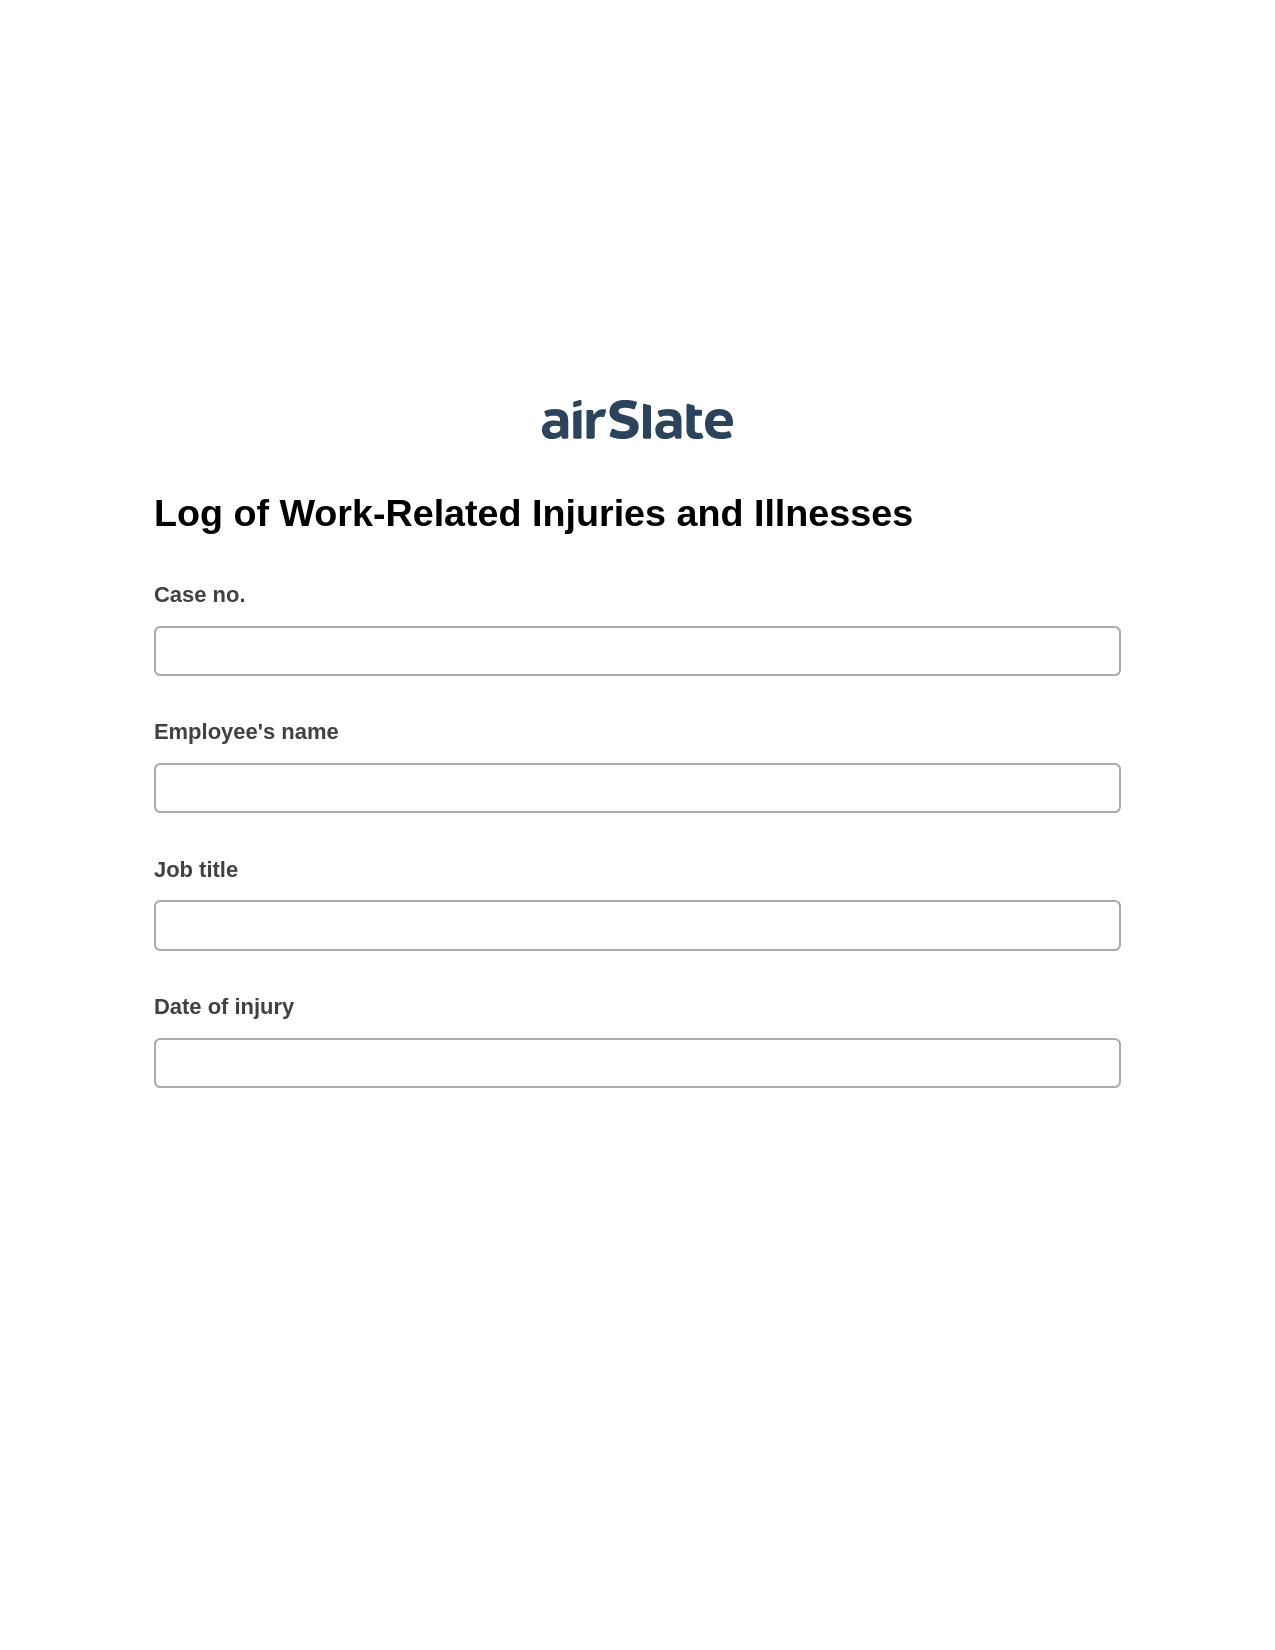 Multirole Log of Work-Related Injuries and Illnesses Pre-fill from NetSuite Records Bot, Remove Slate Bot, Export to NetSuite Record Bot